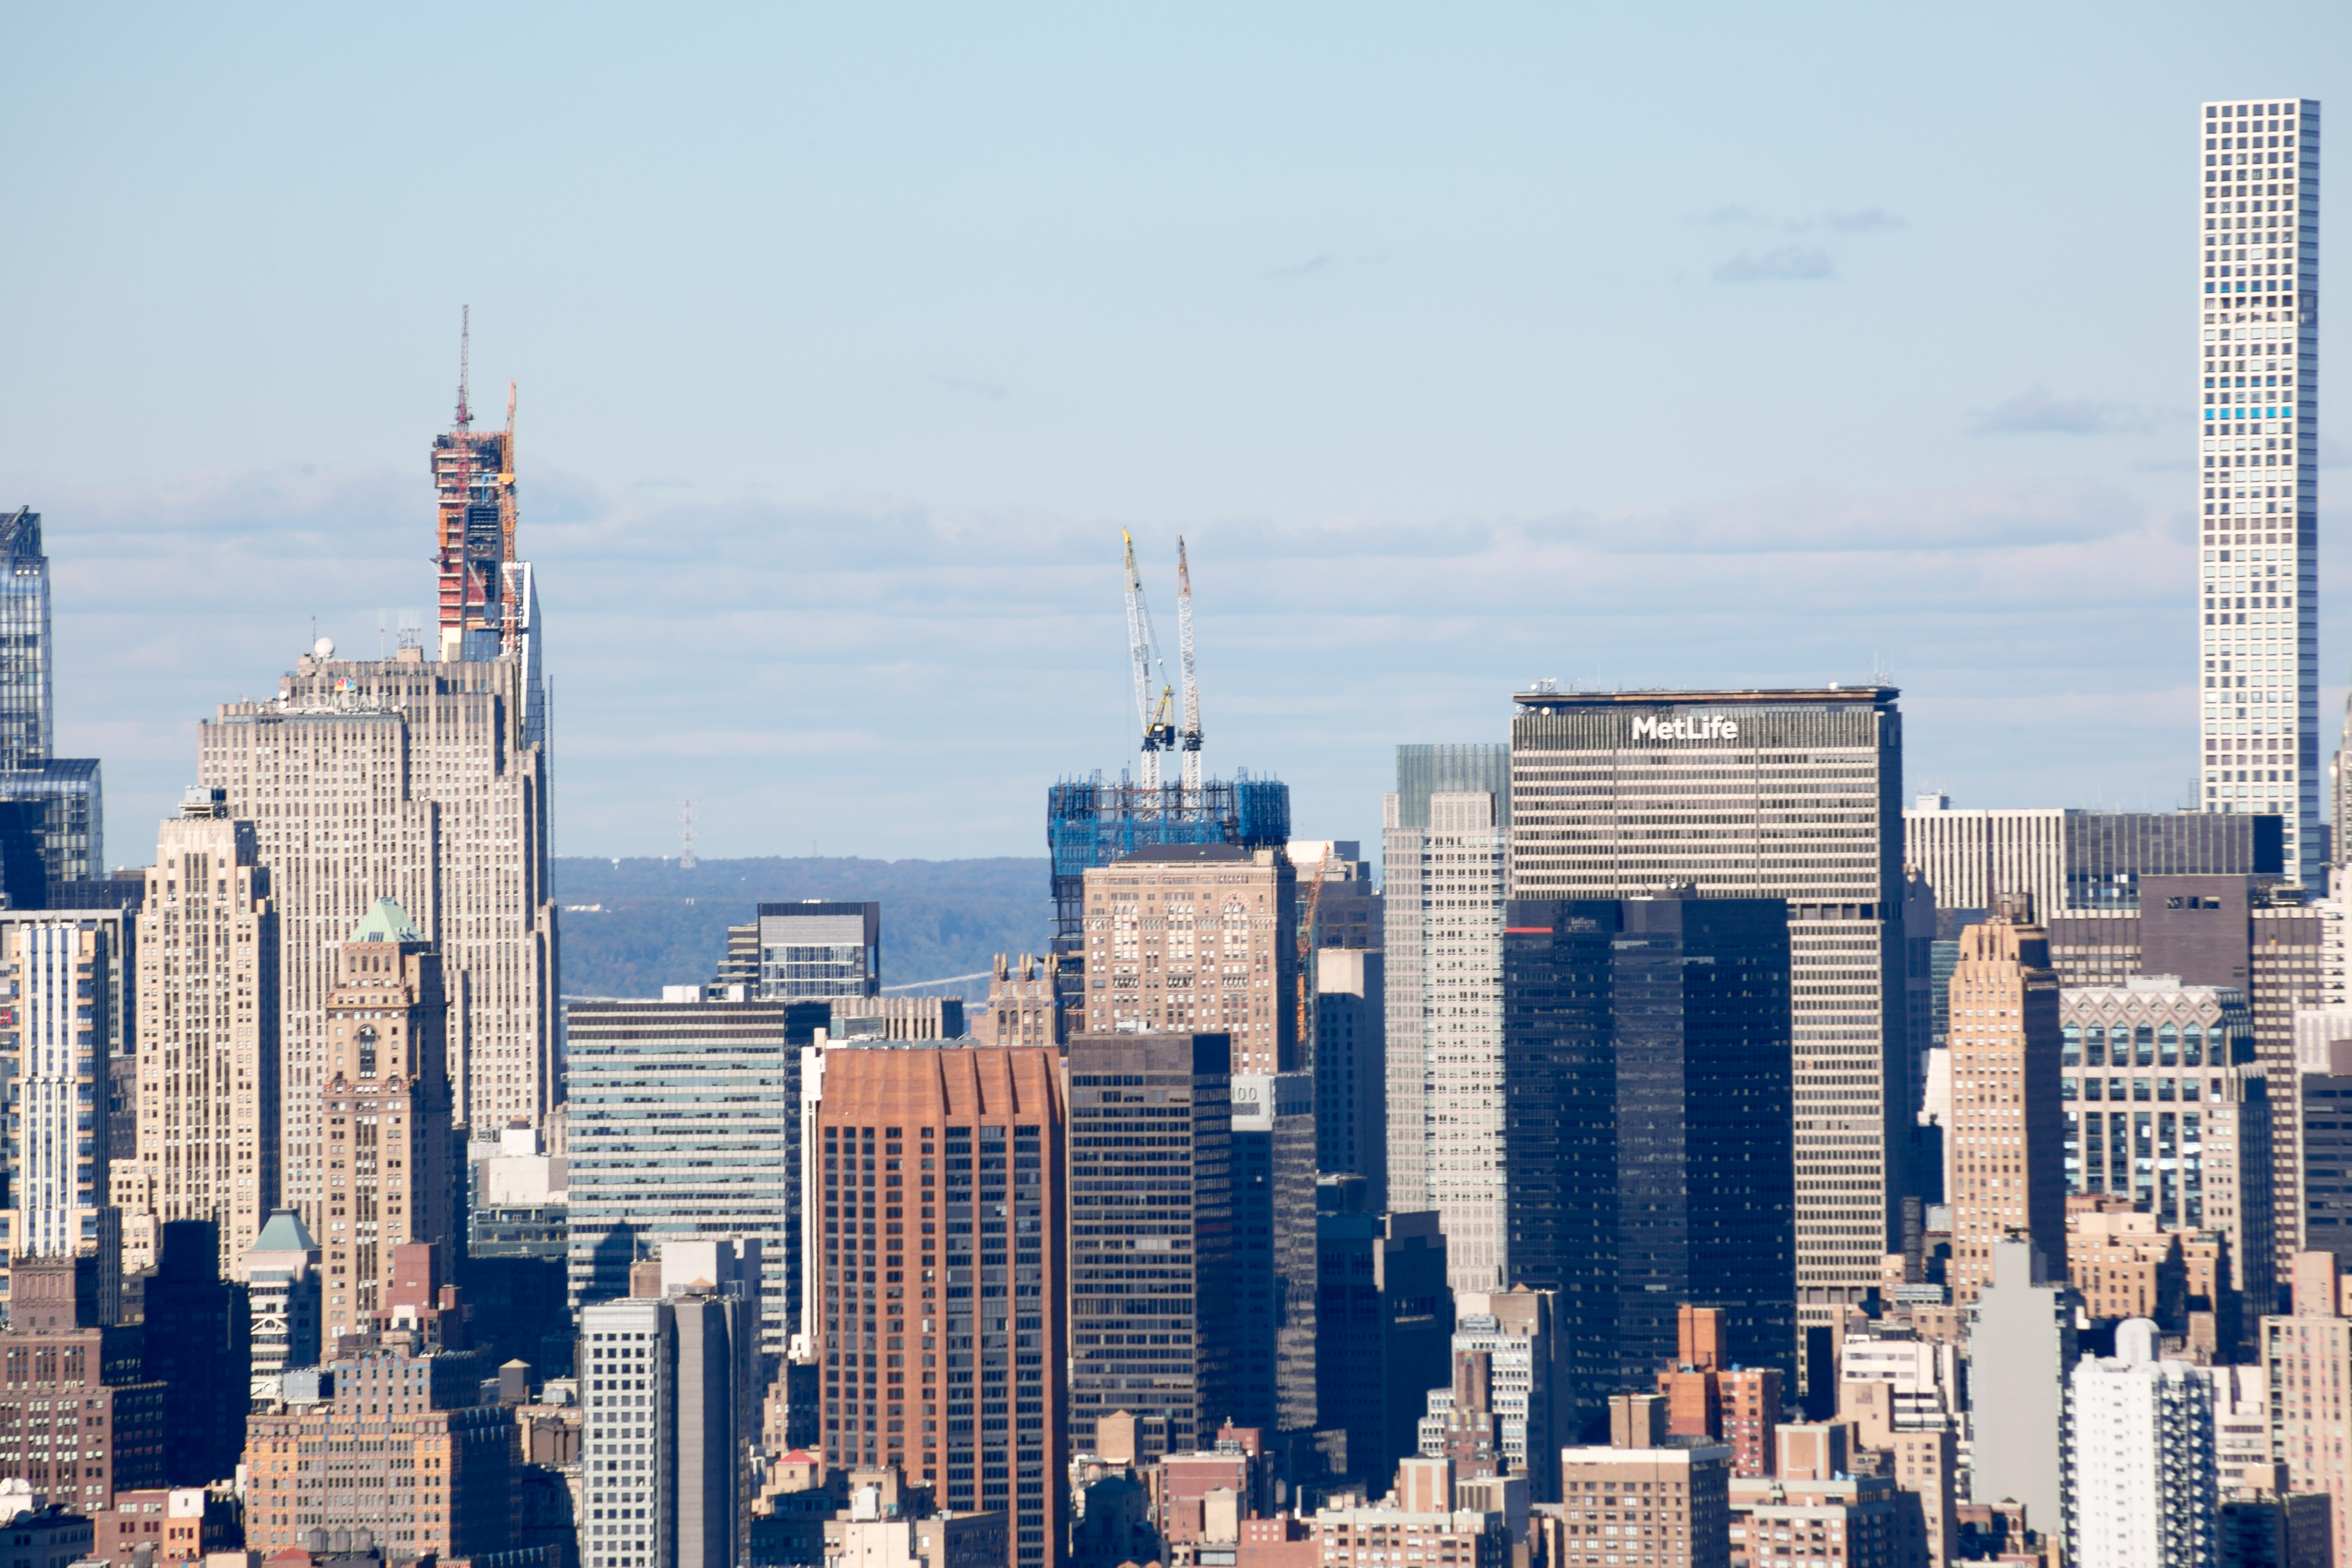 One Vanderbilt as seen from One Manhattan Square, image by Andrew Campbell Nelson